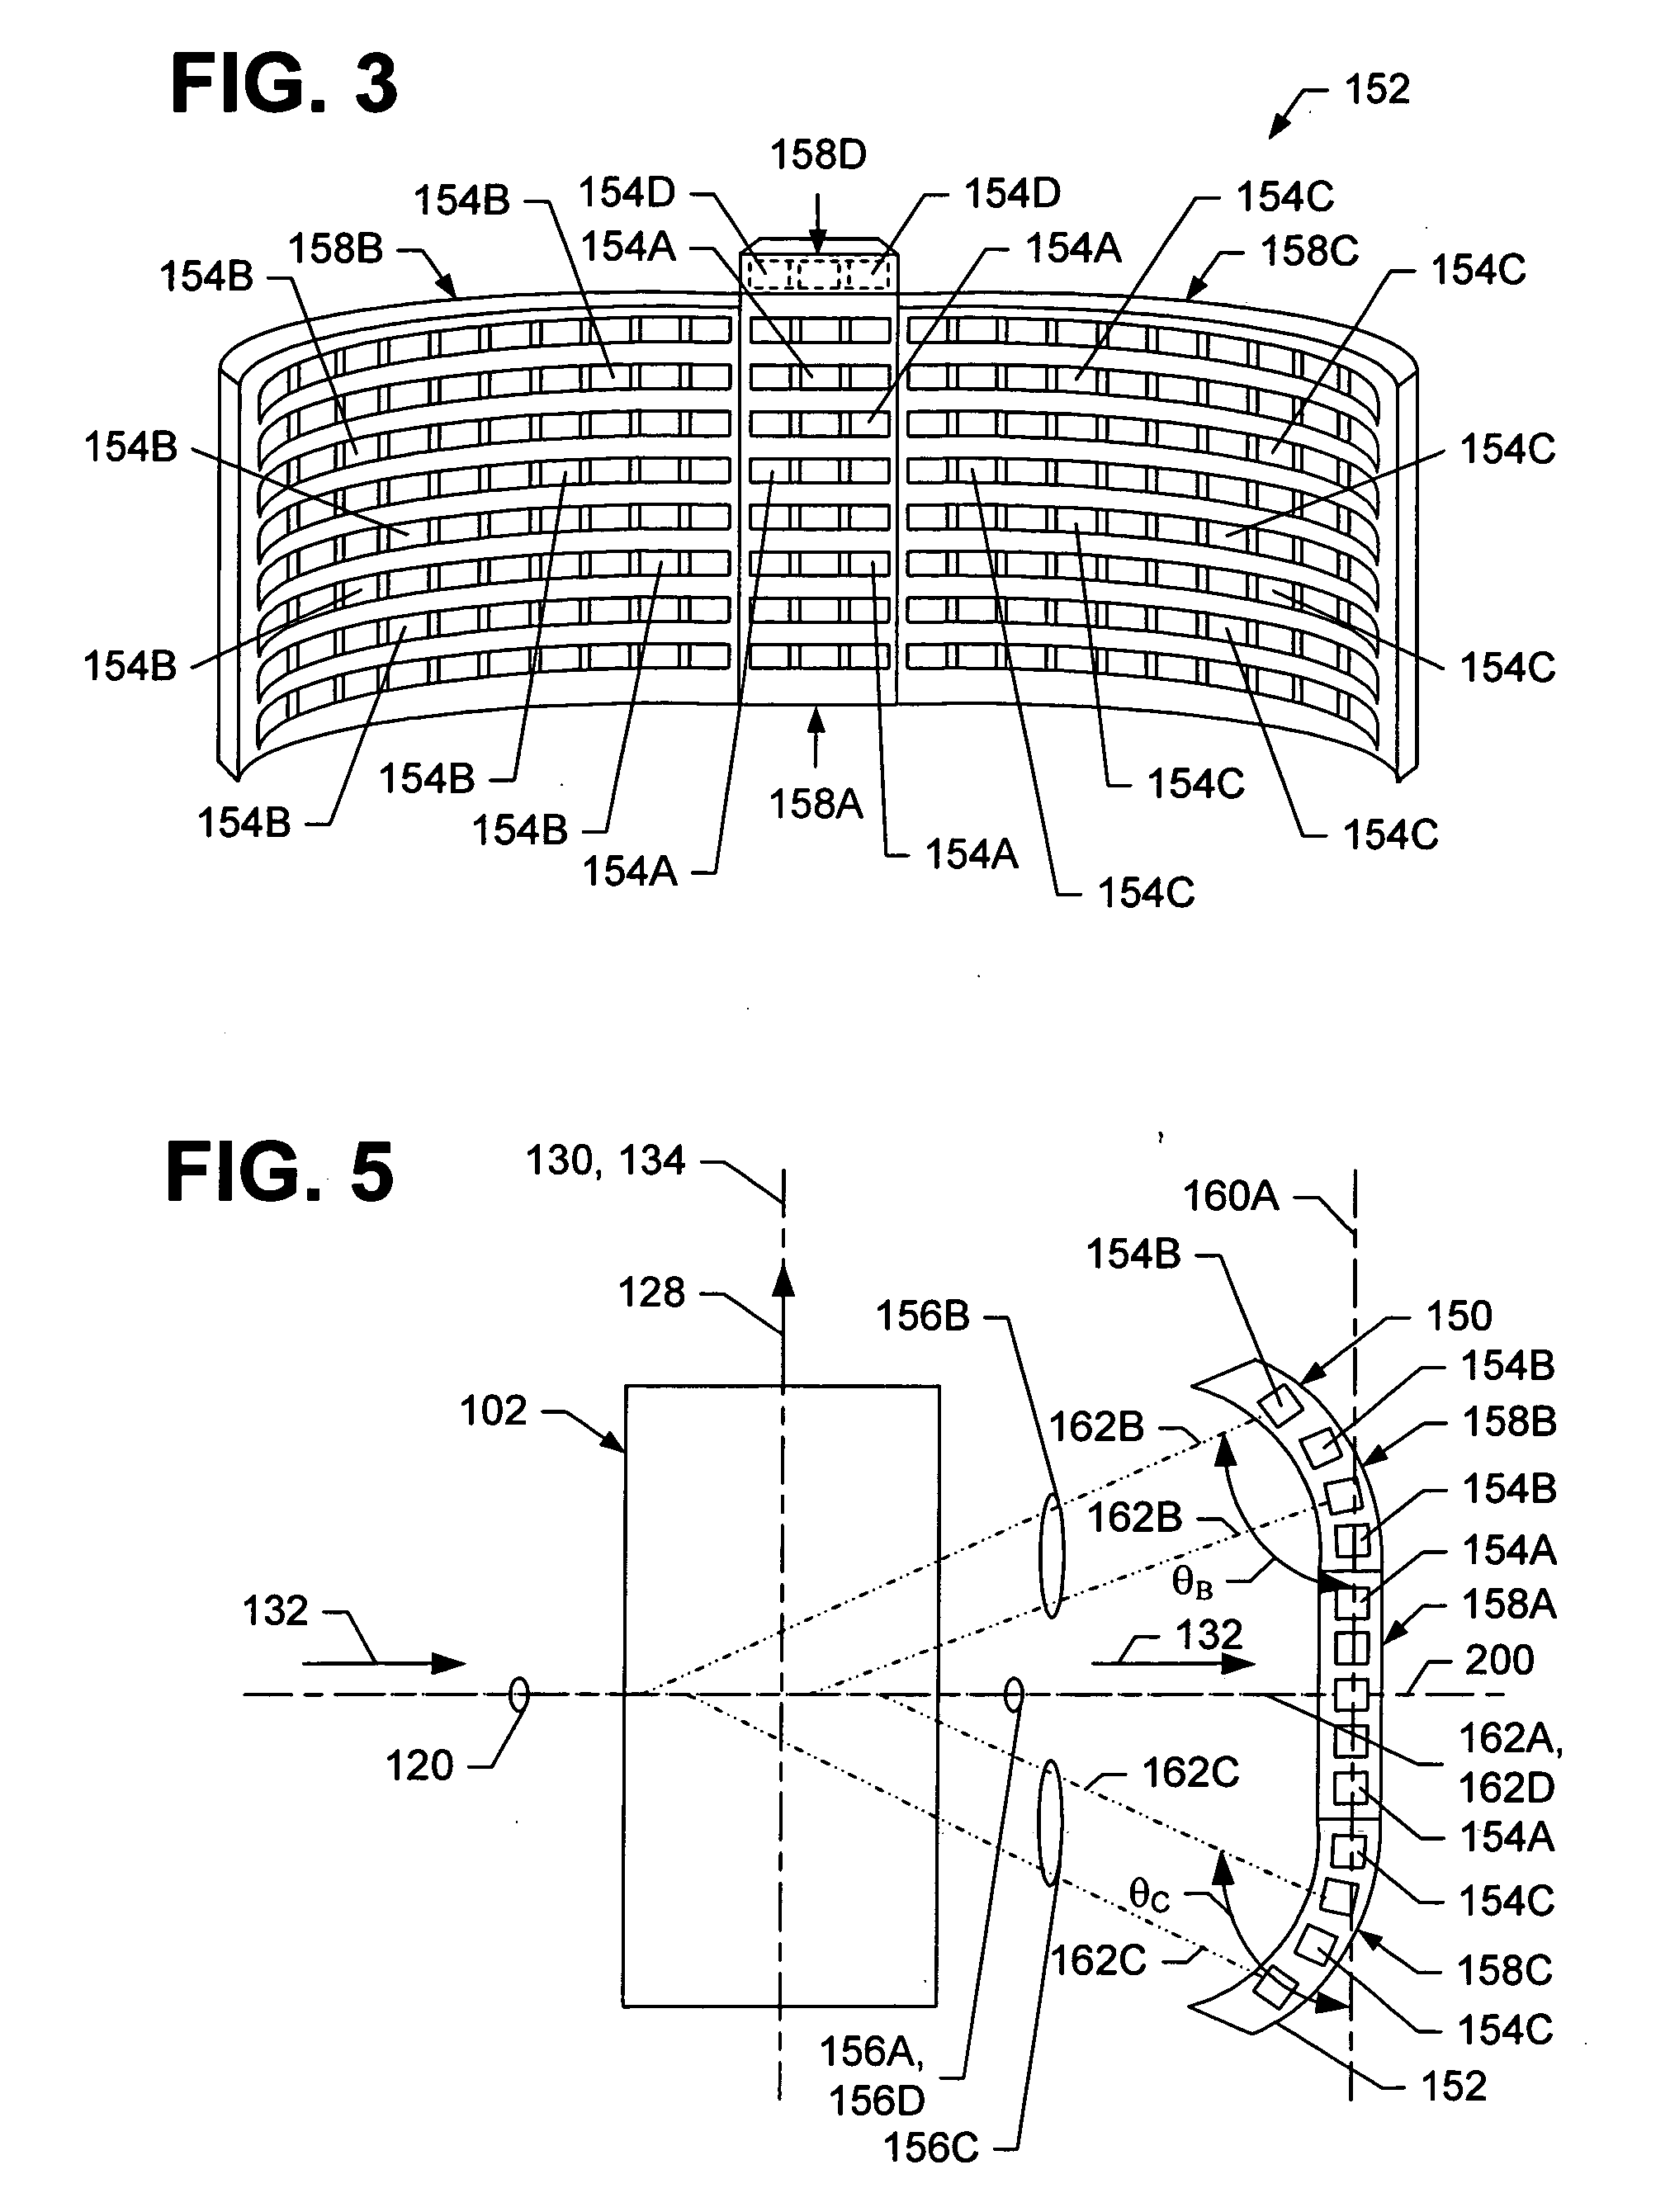 Non-intrusive container inspection system using forward-scattered radiation